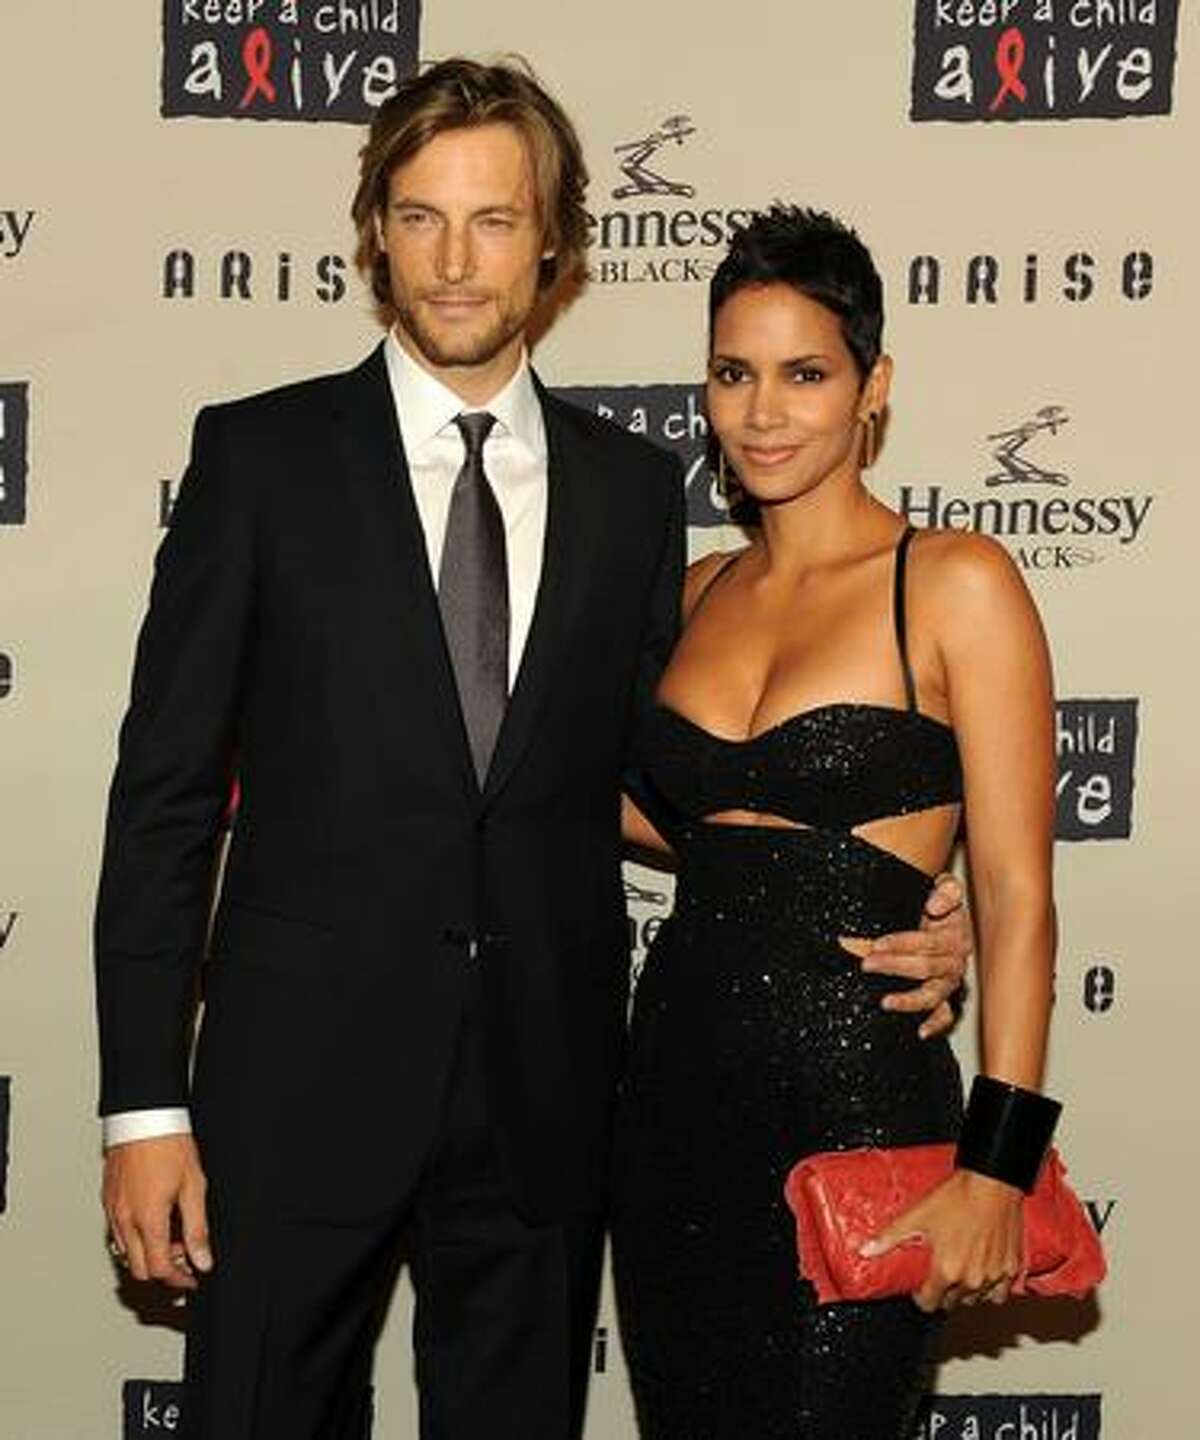 Model Gabriel Aubry and girlfriend actress Halle Berry attend Keep A Child Alive's 6th Annual Black Ball at Hammerstein Ballroom in New York City.